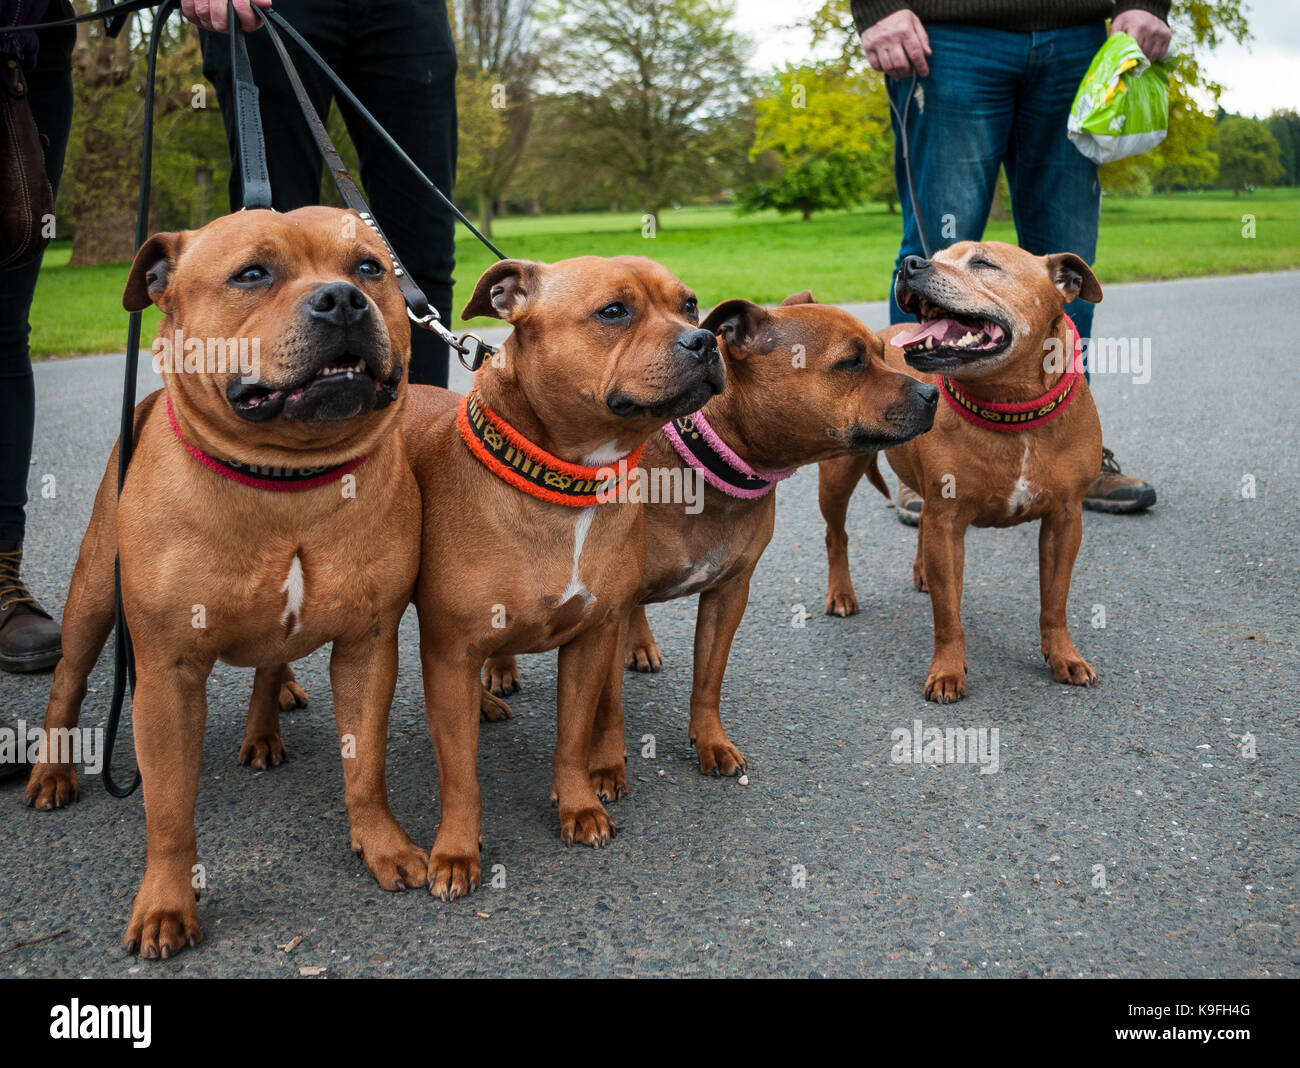 Four sandy coloured Staffordshire Bull Terriers standing and posing for the camera. Stock Photo